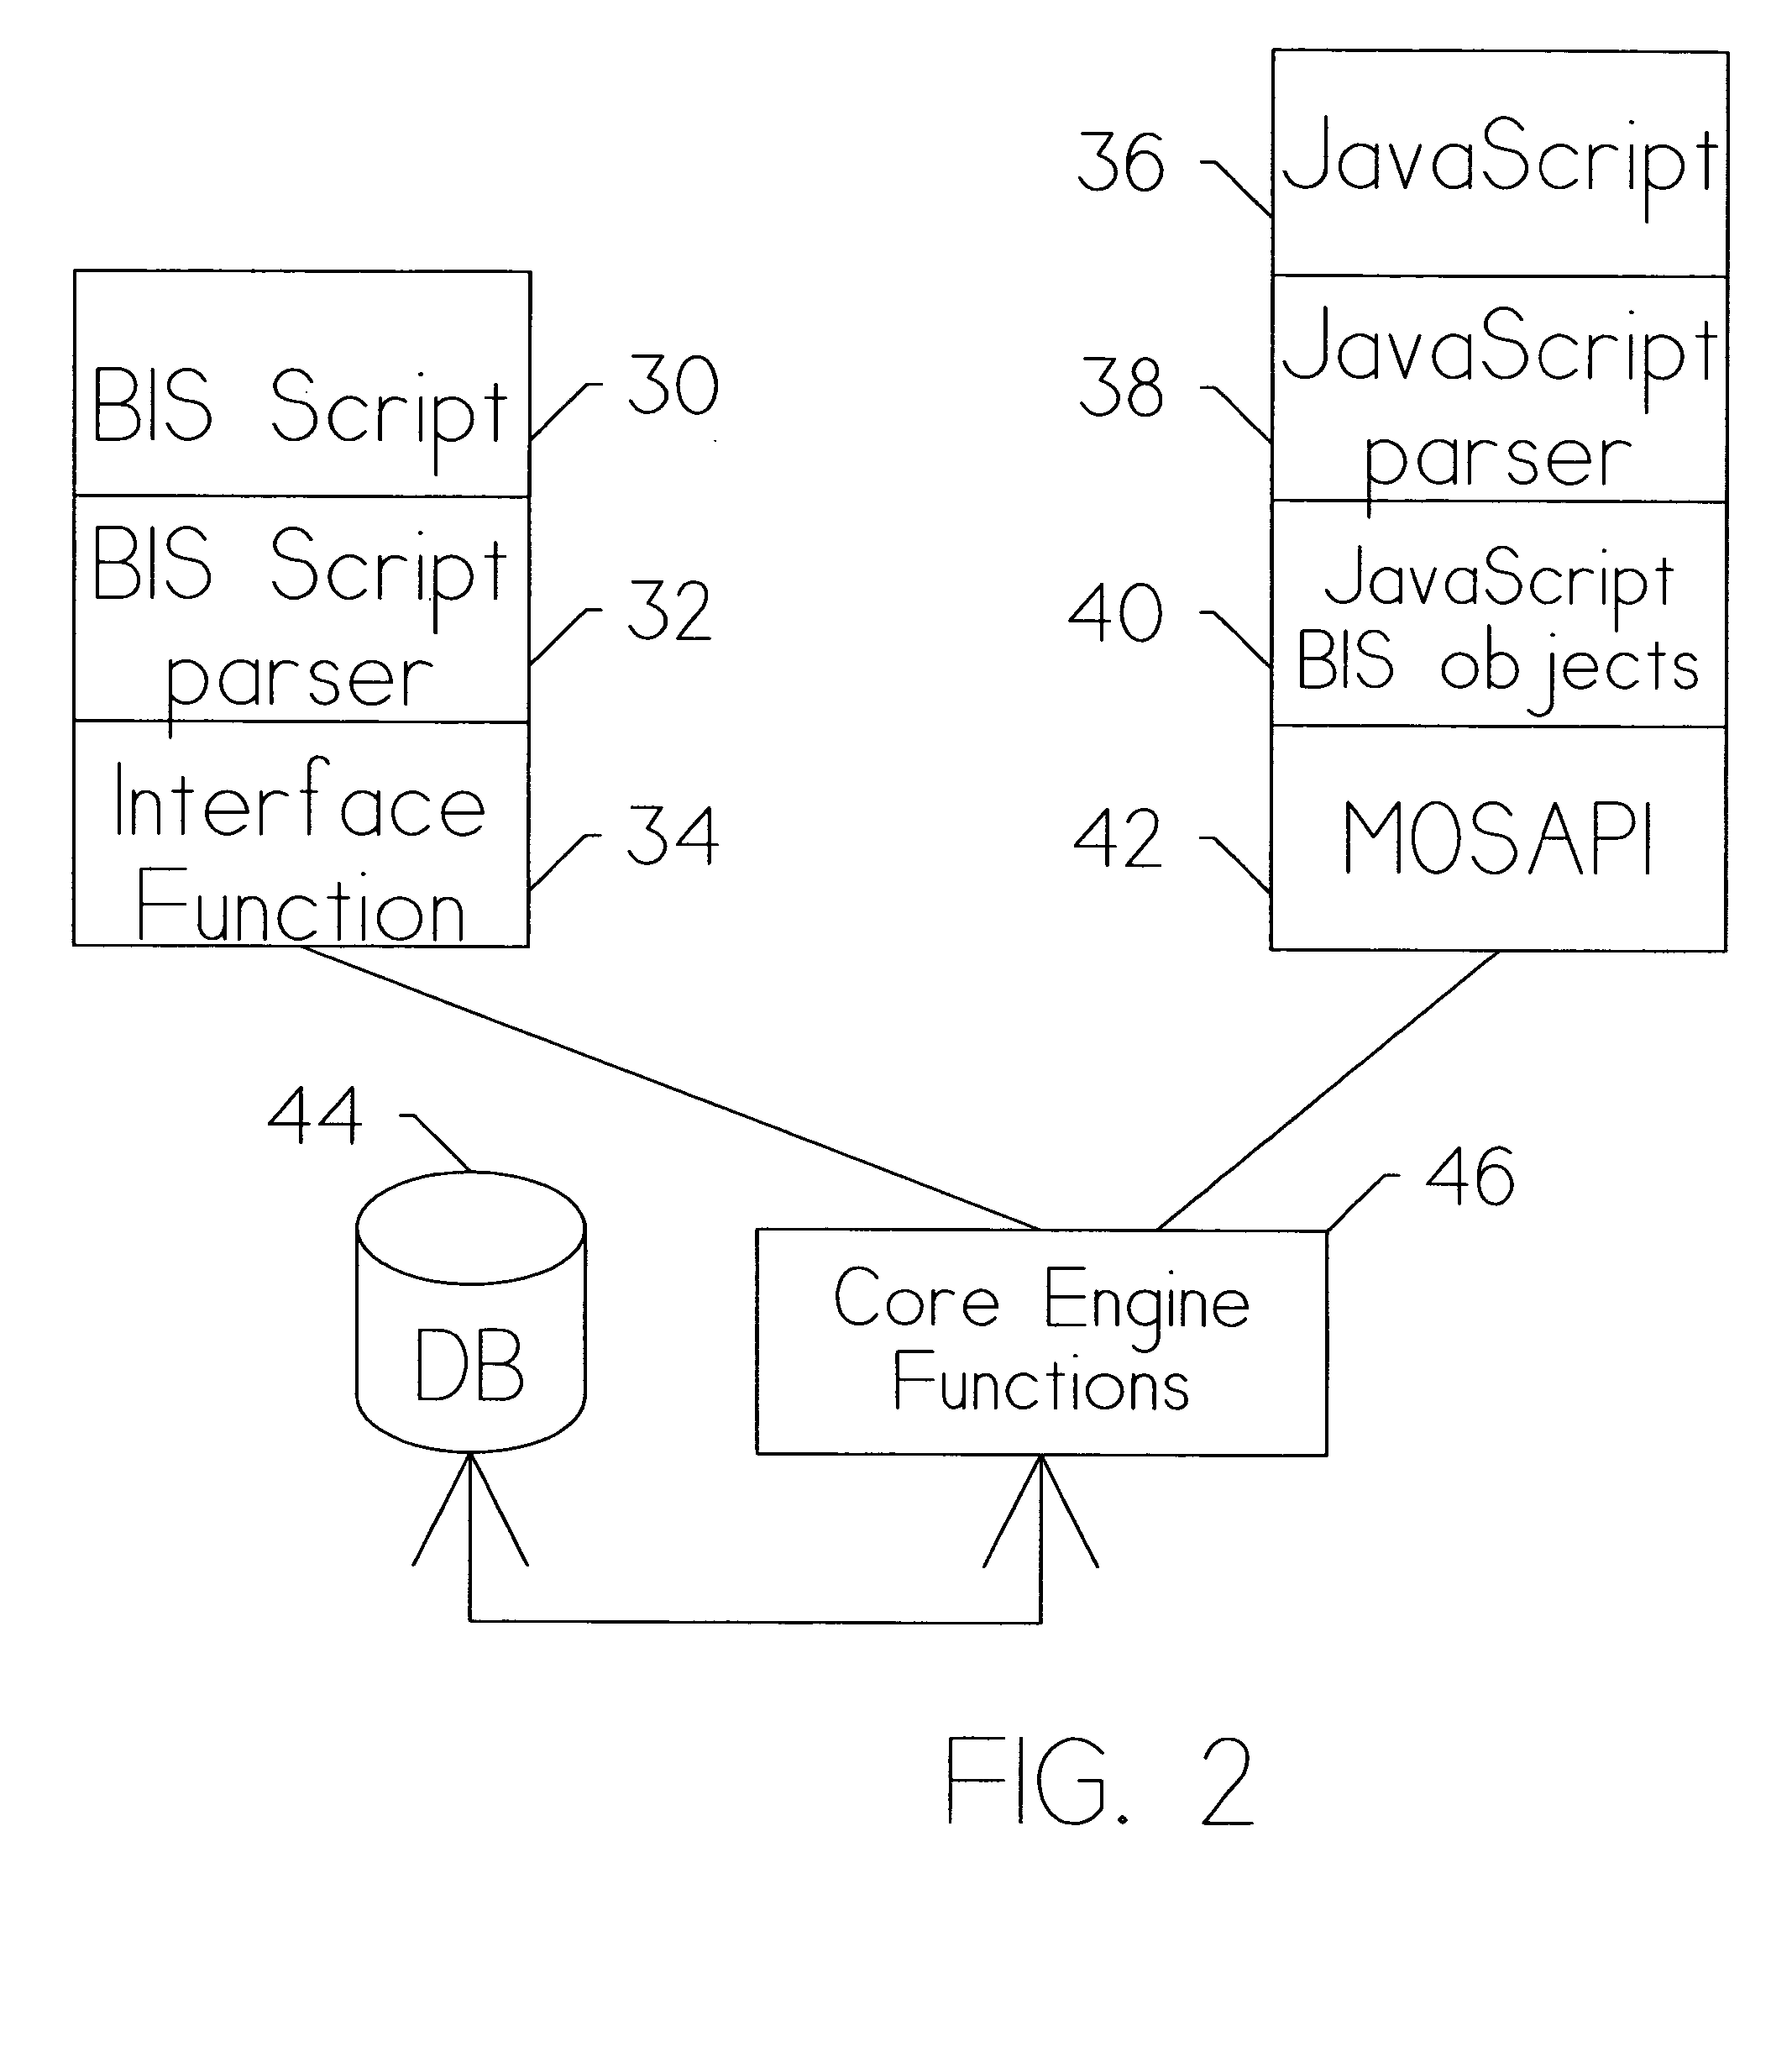 Method and apparatus for aggregated update of dataset records in a JavaScript environment